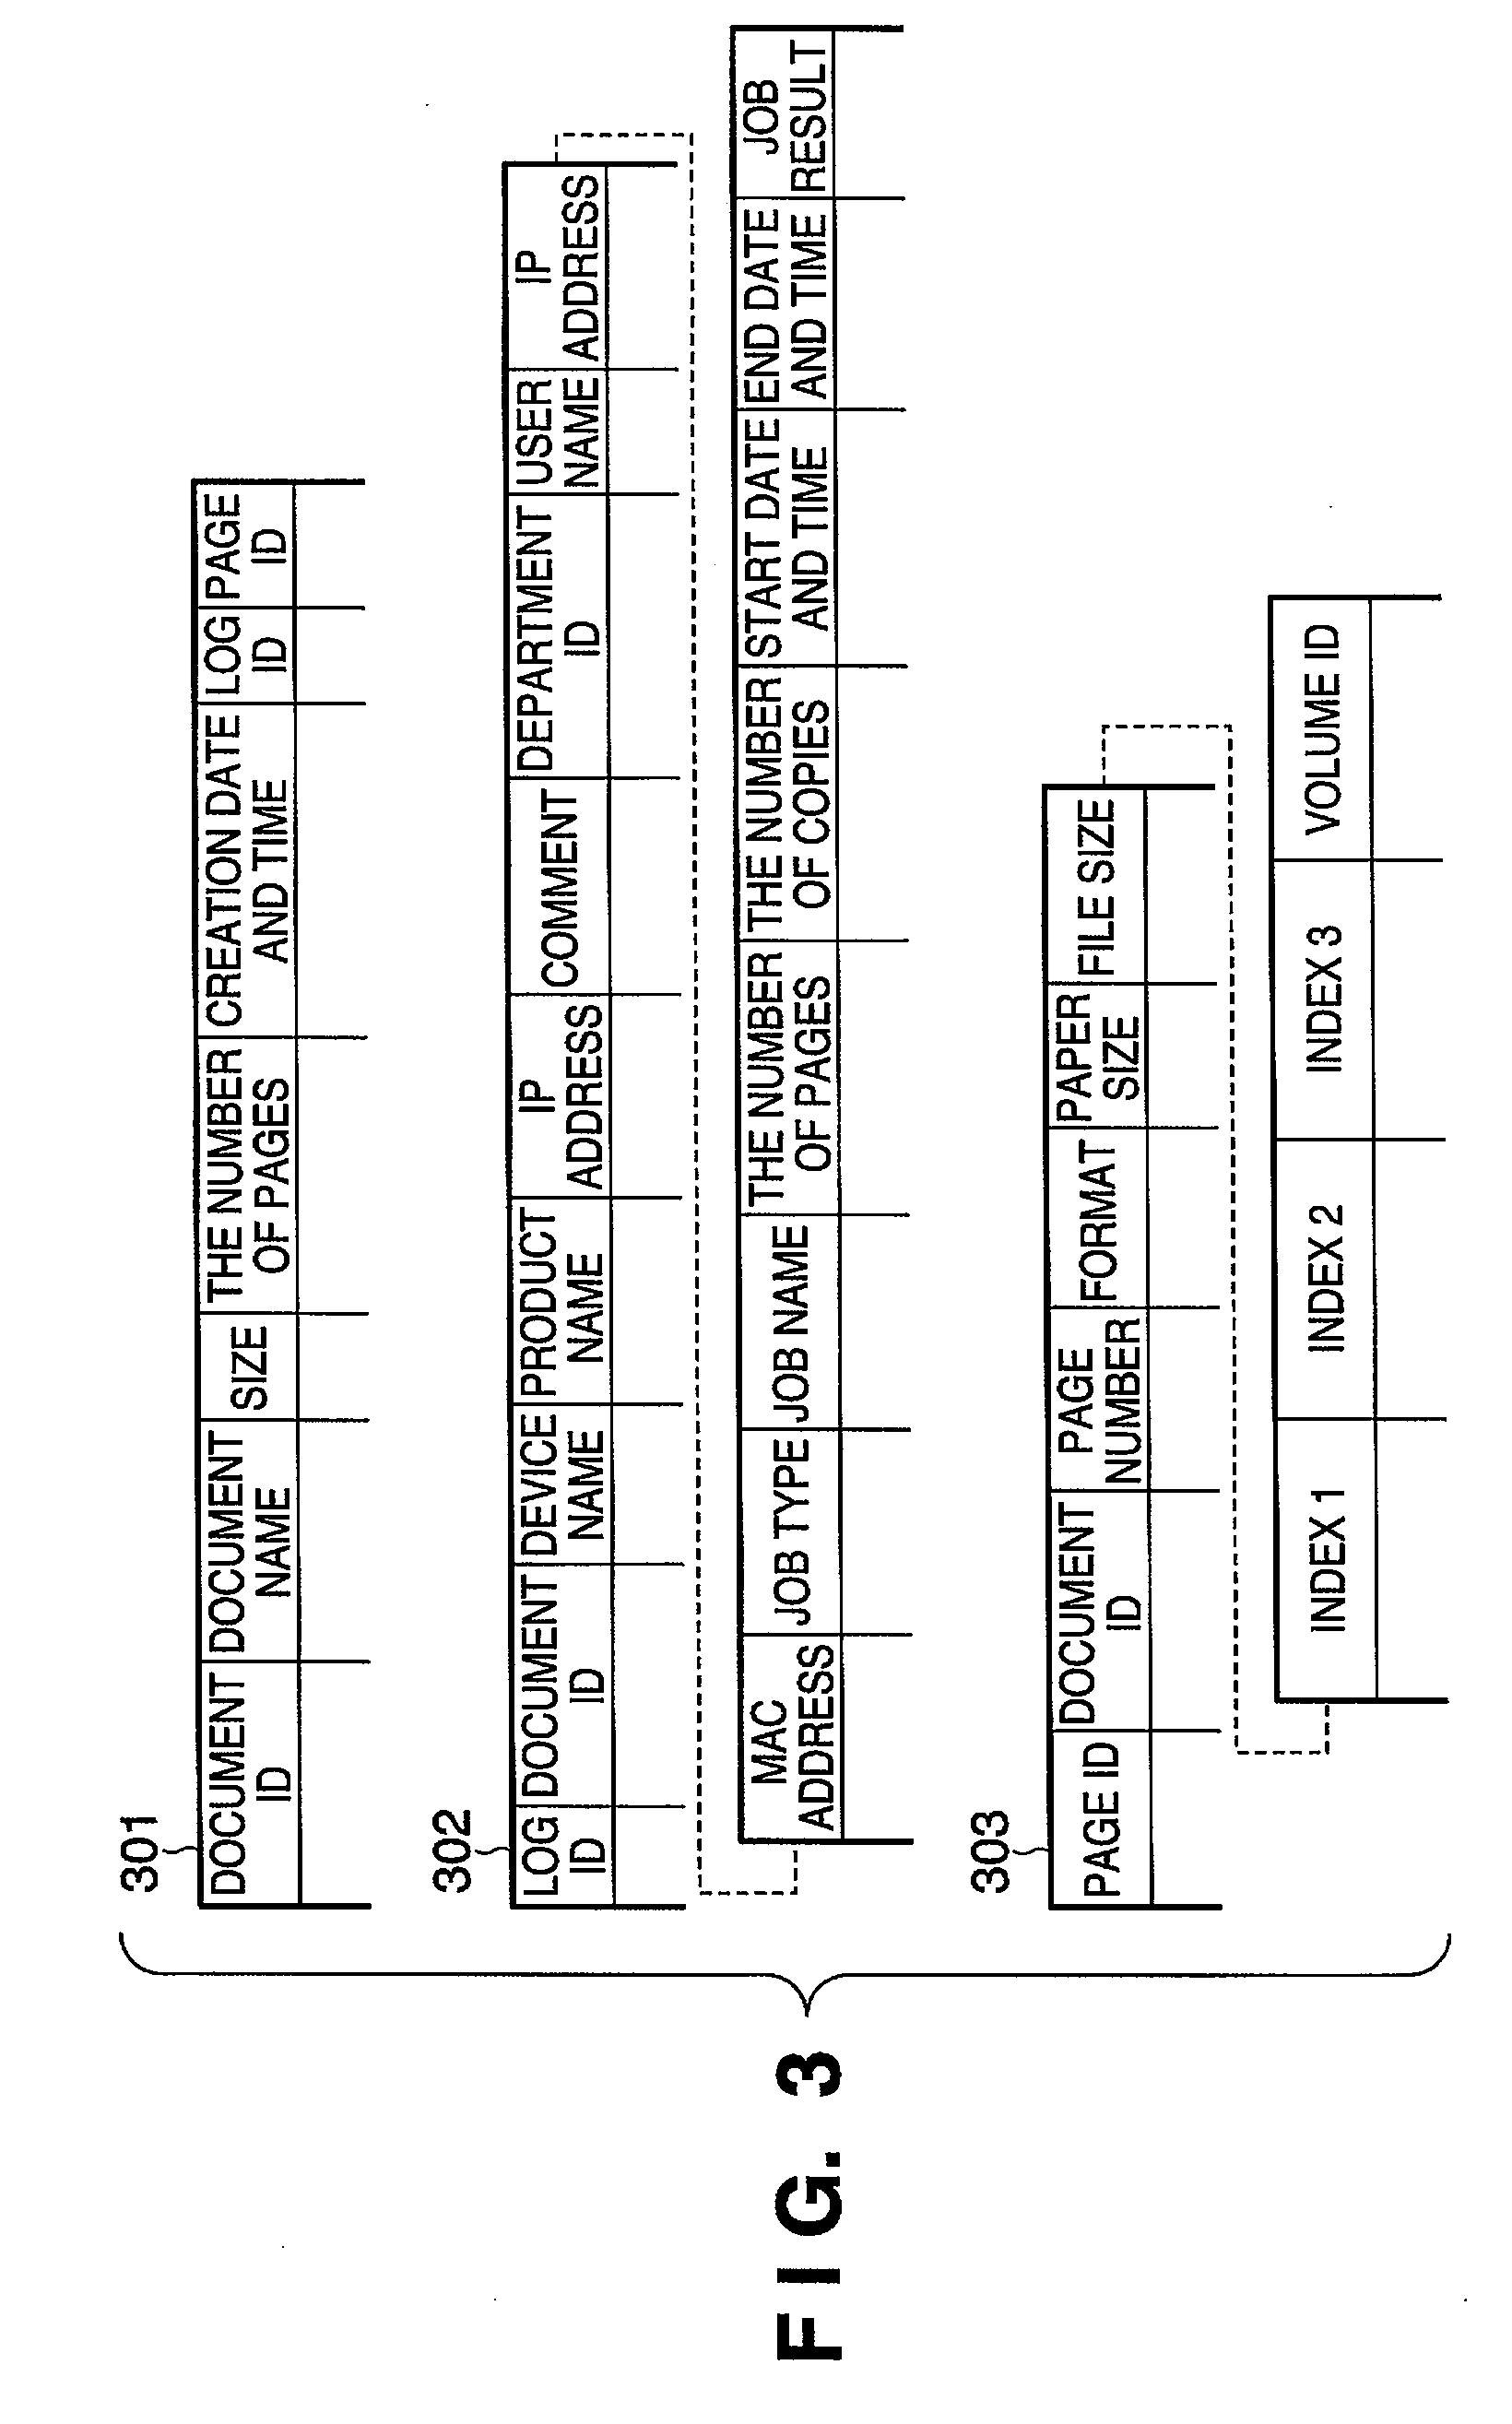 Image processing system, image processing apparatus, and image processing method